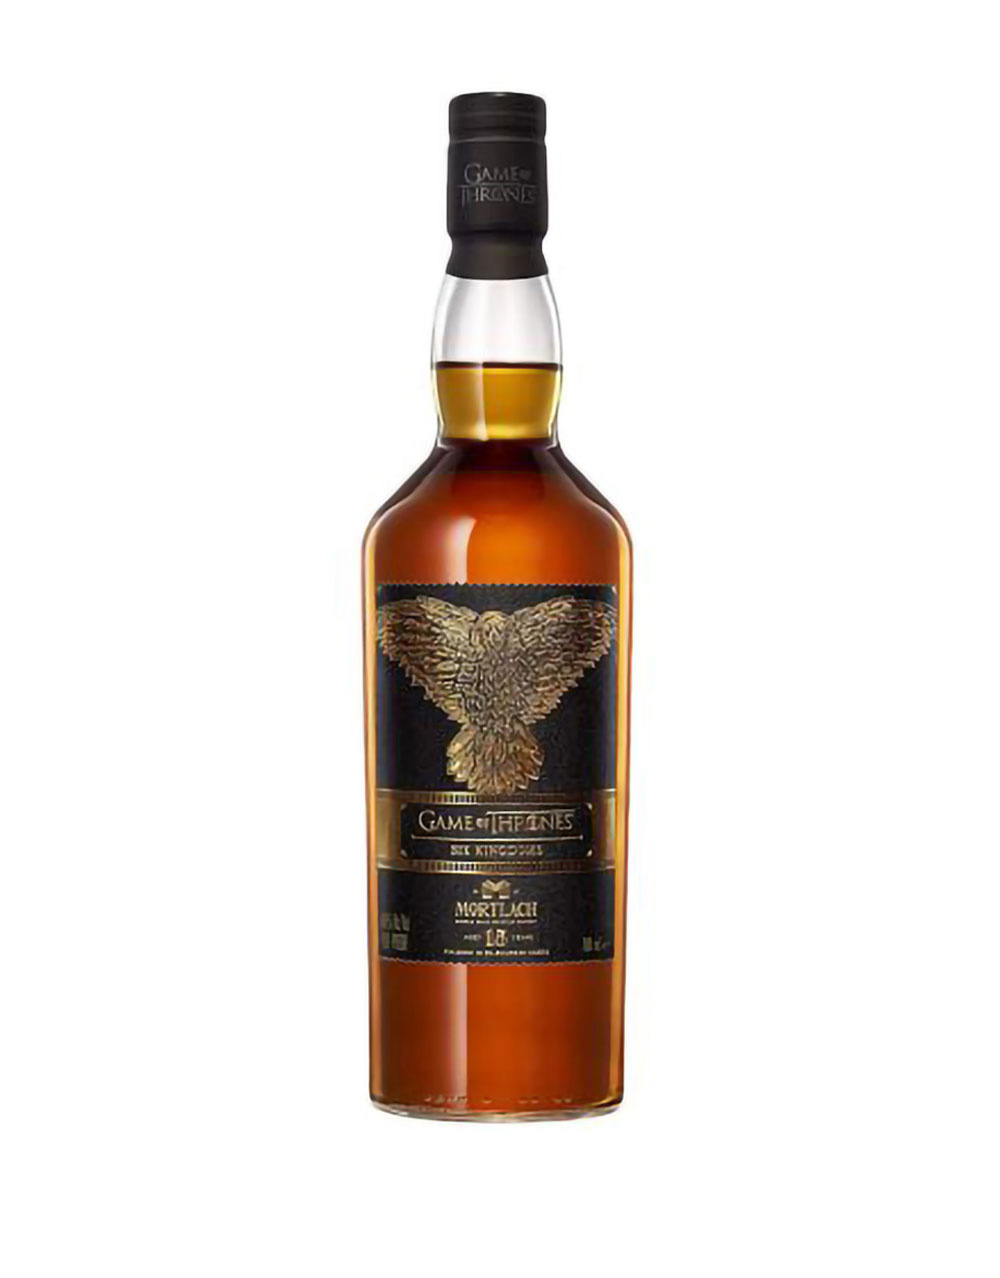 Game Of Thrones Six Kingdoms Mortlach 15 Year Old Single Malt Scotch Whisky